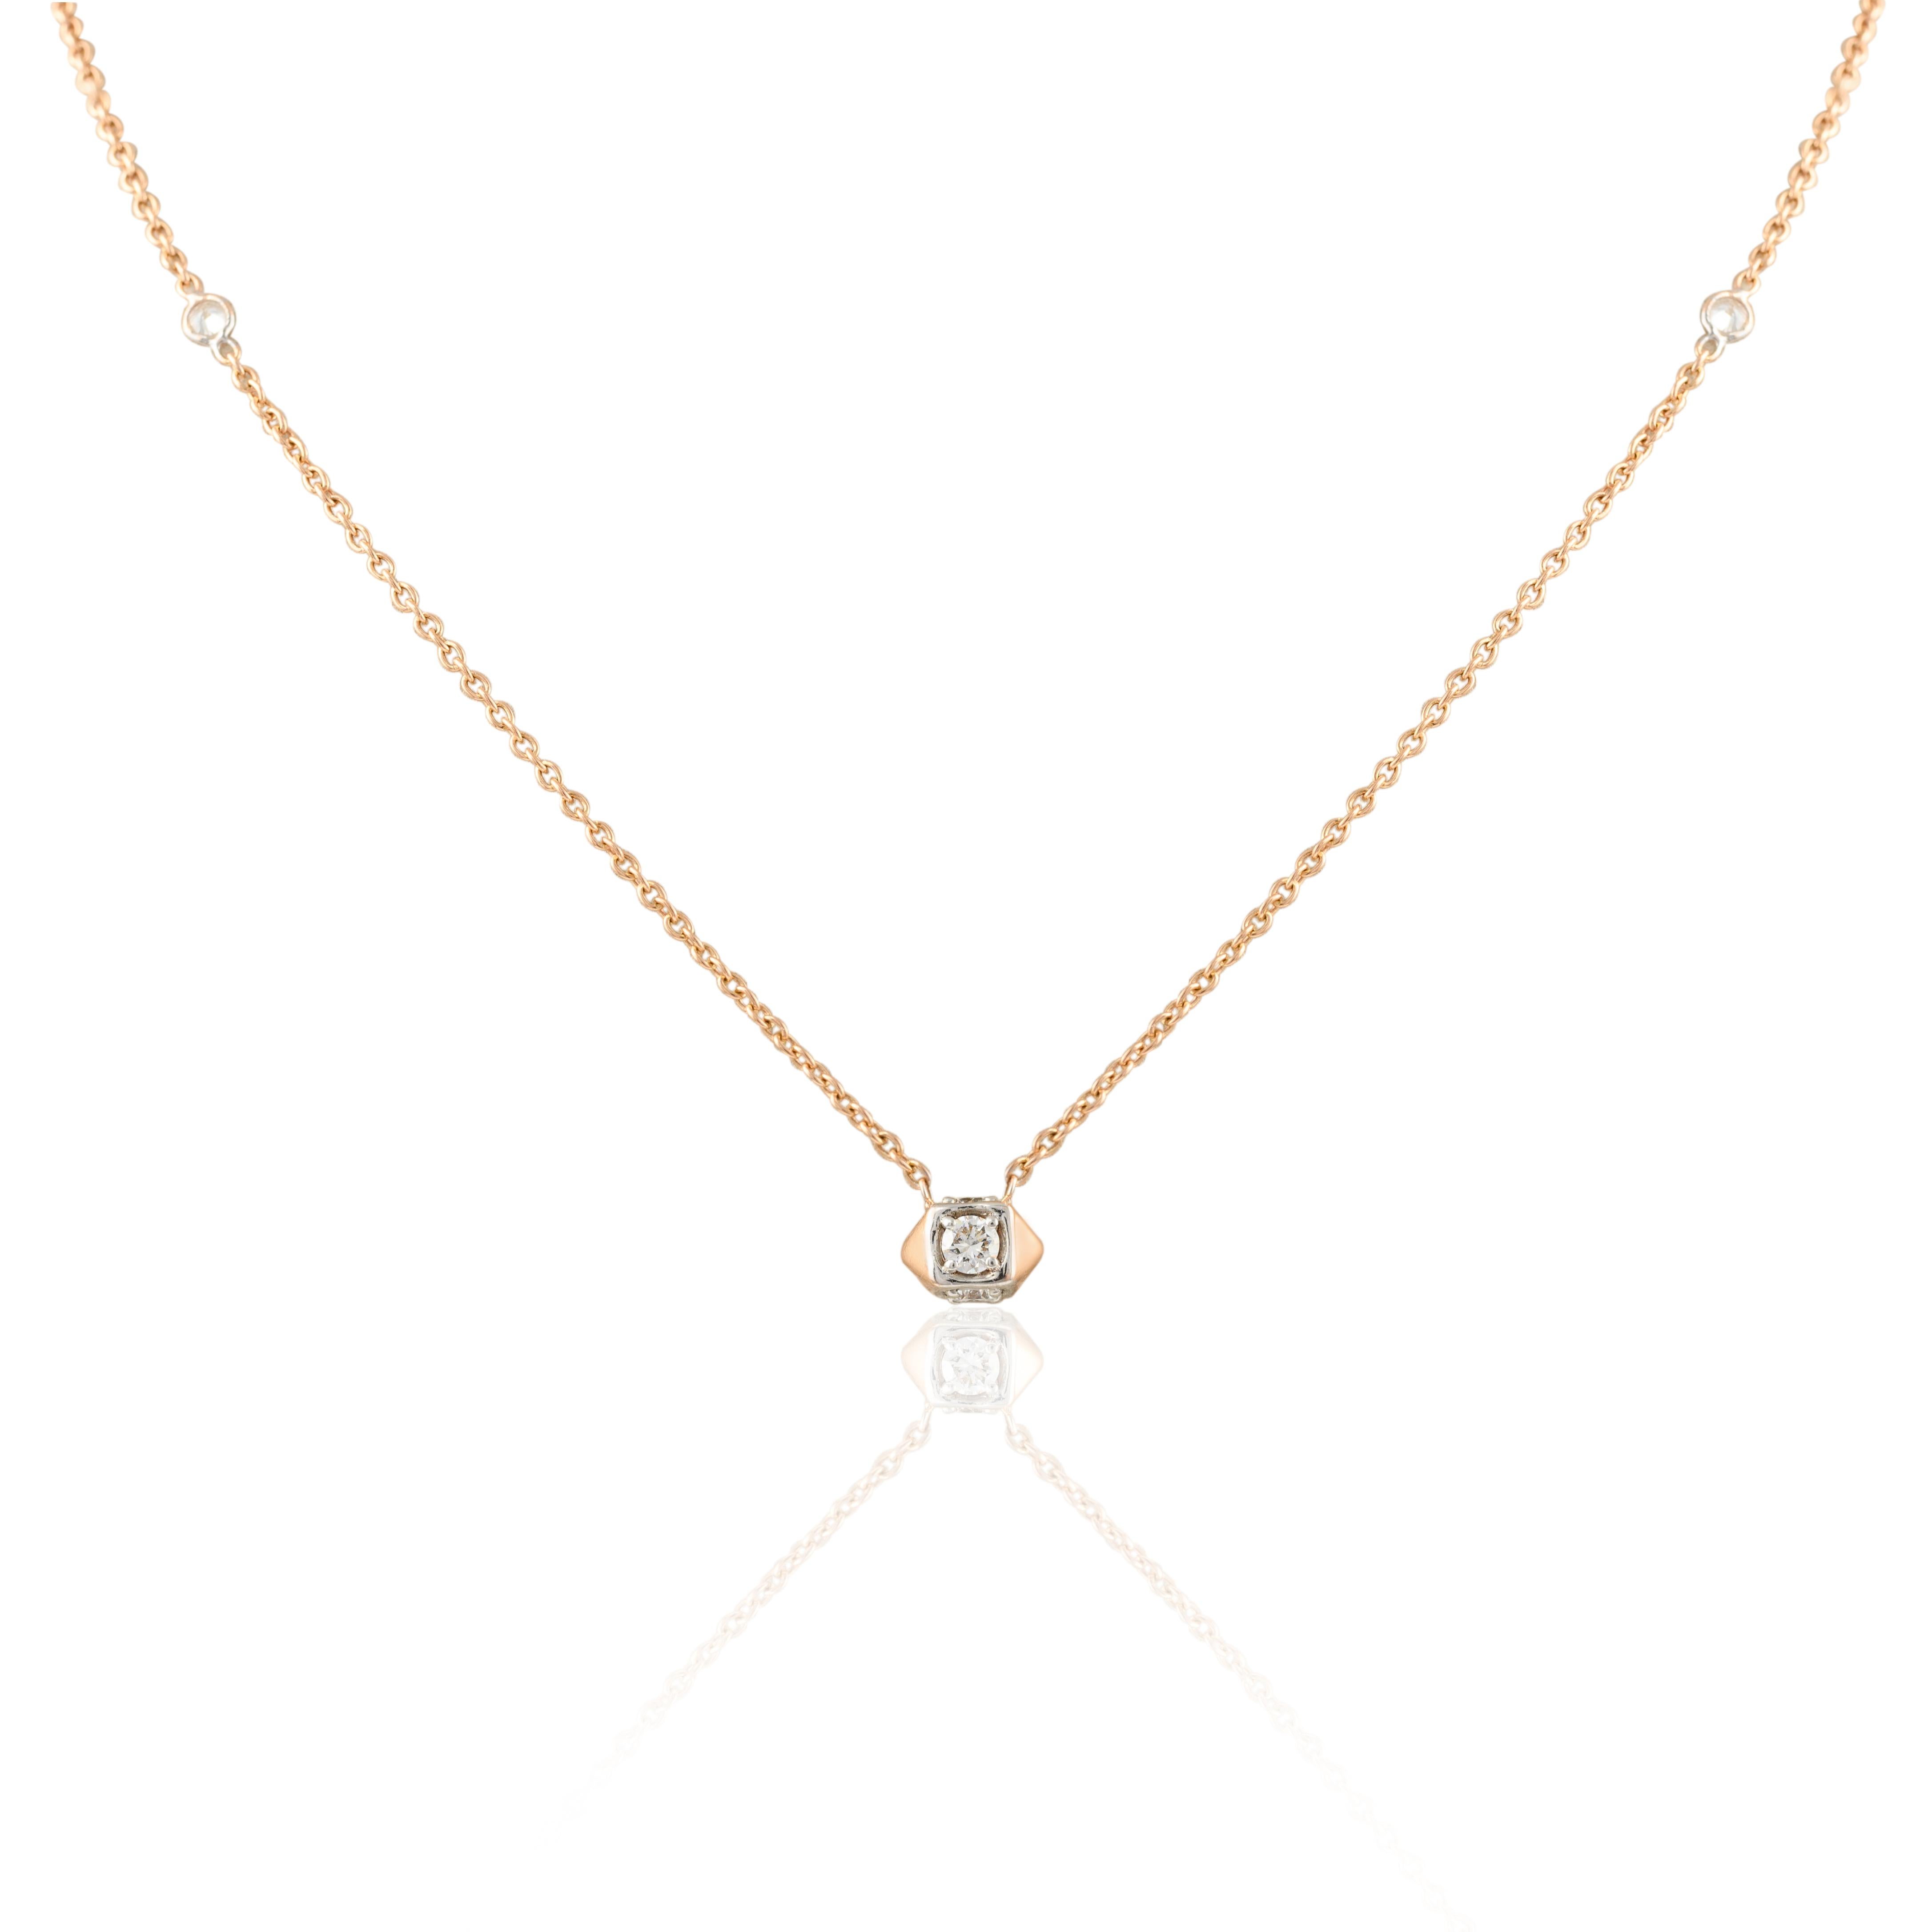 Round Cut Minimalist Diamond Chain Necklace in 18k Solid Rose Gold, Thanksgiving Gift For Sale